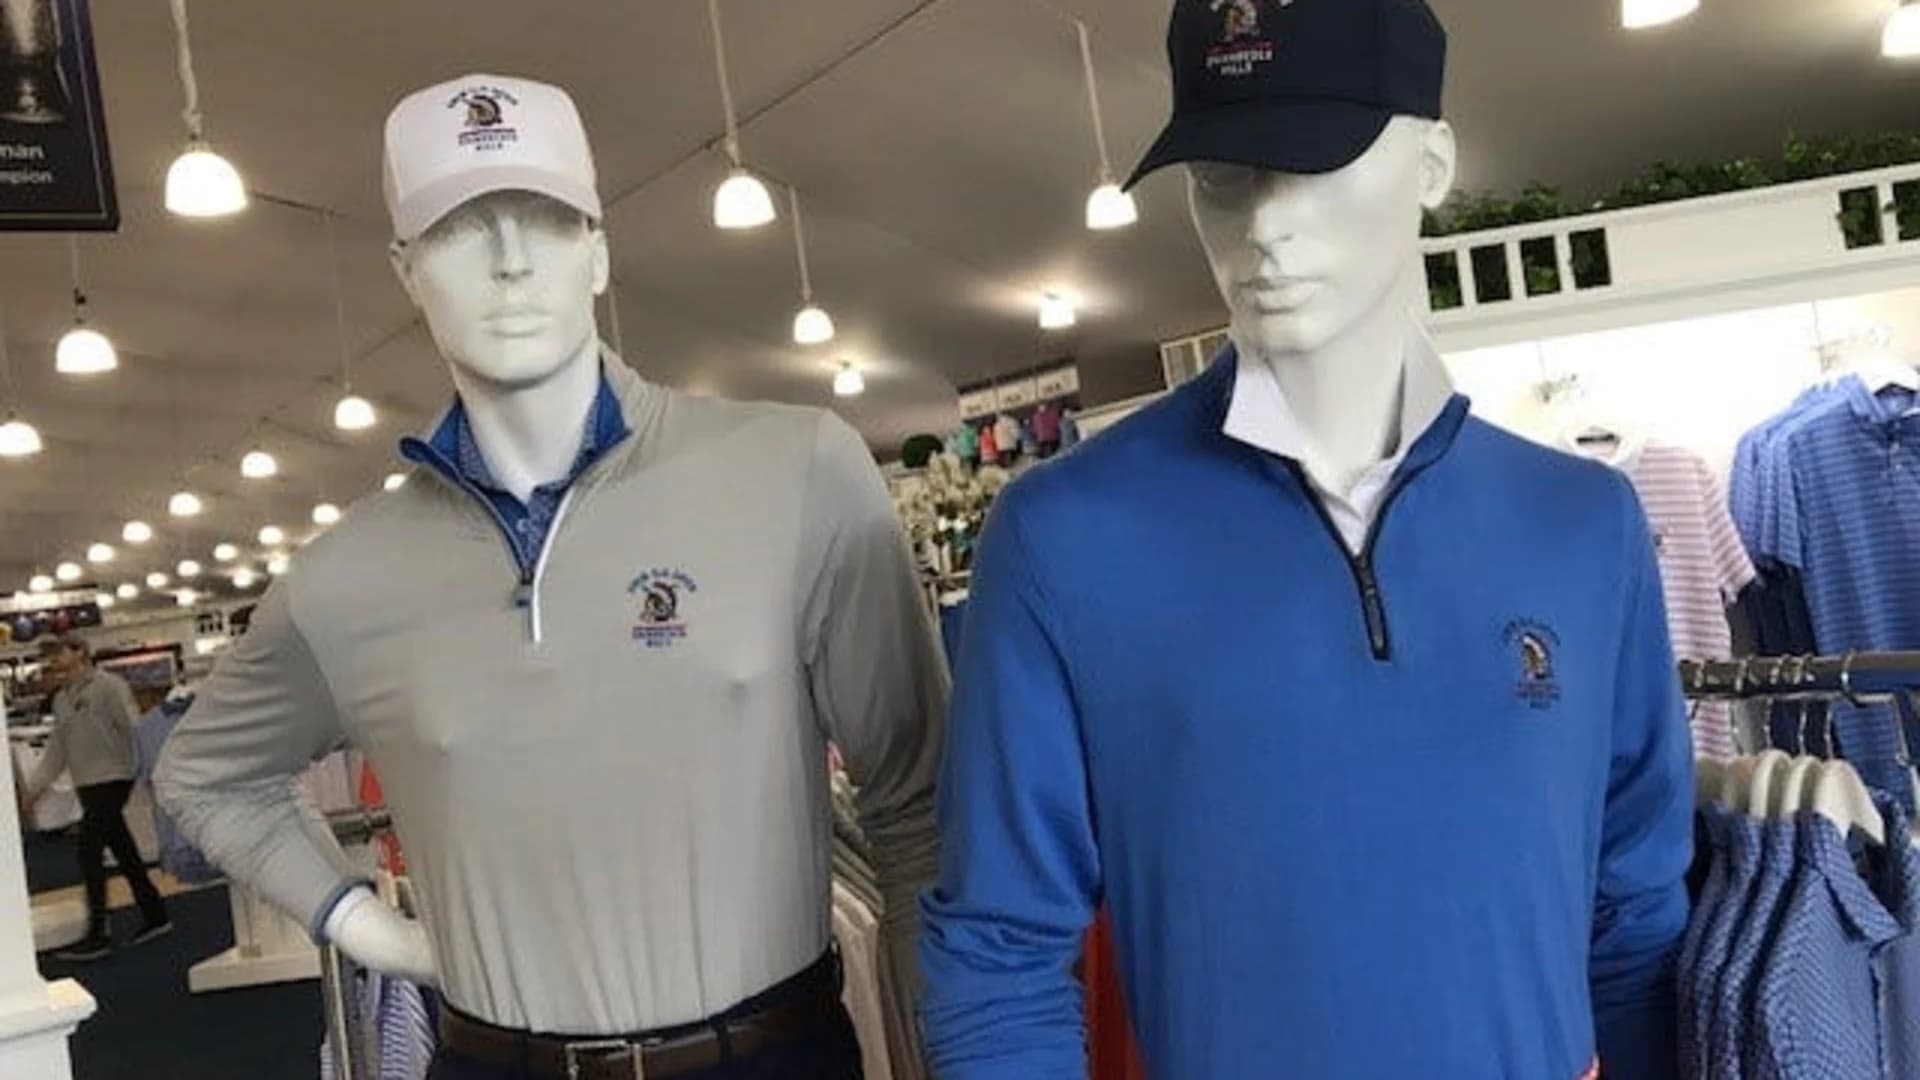 Merchandise available at U.S. Open